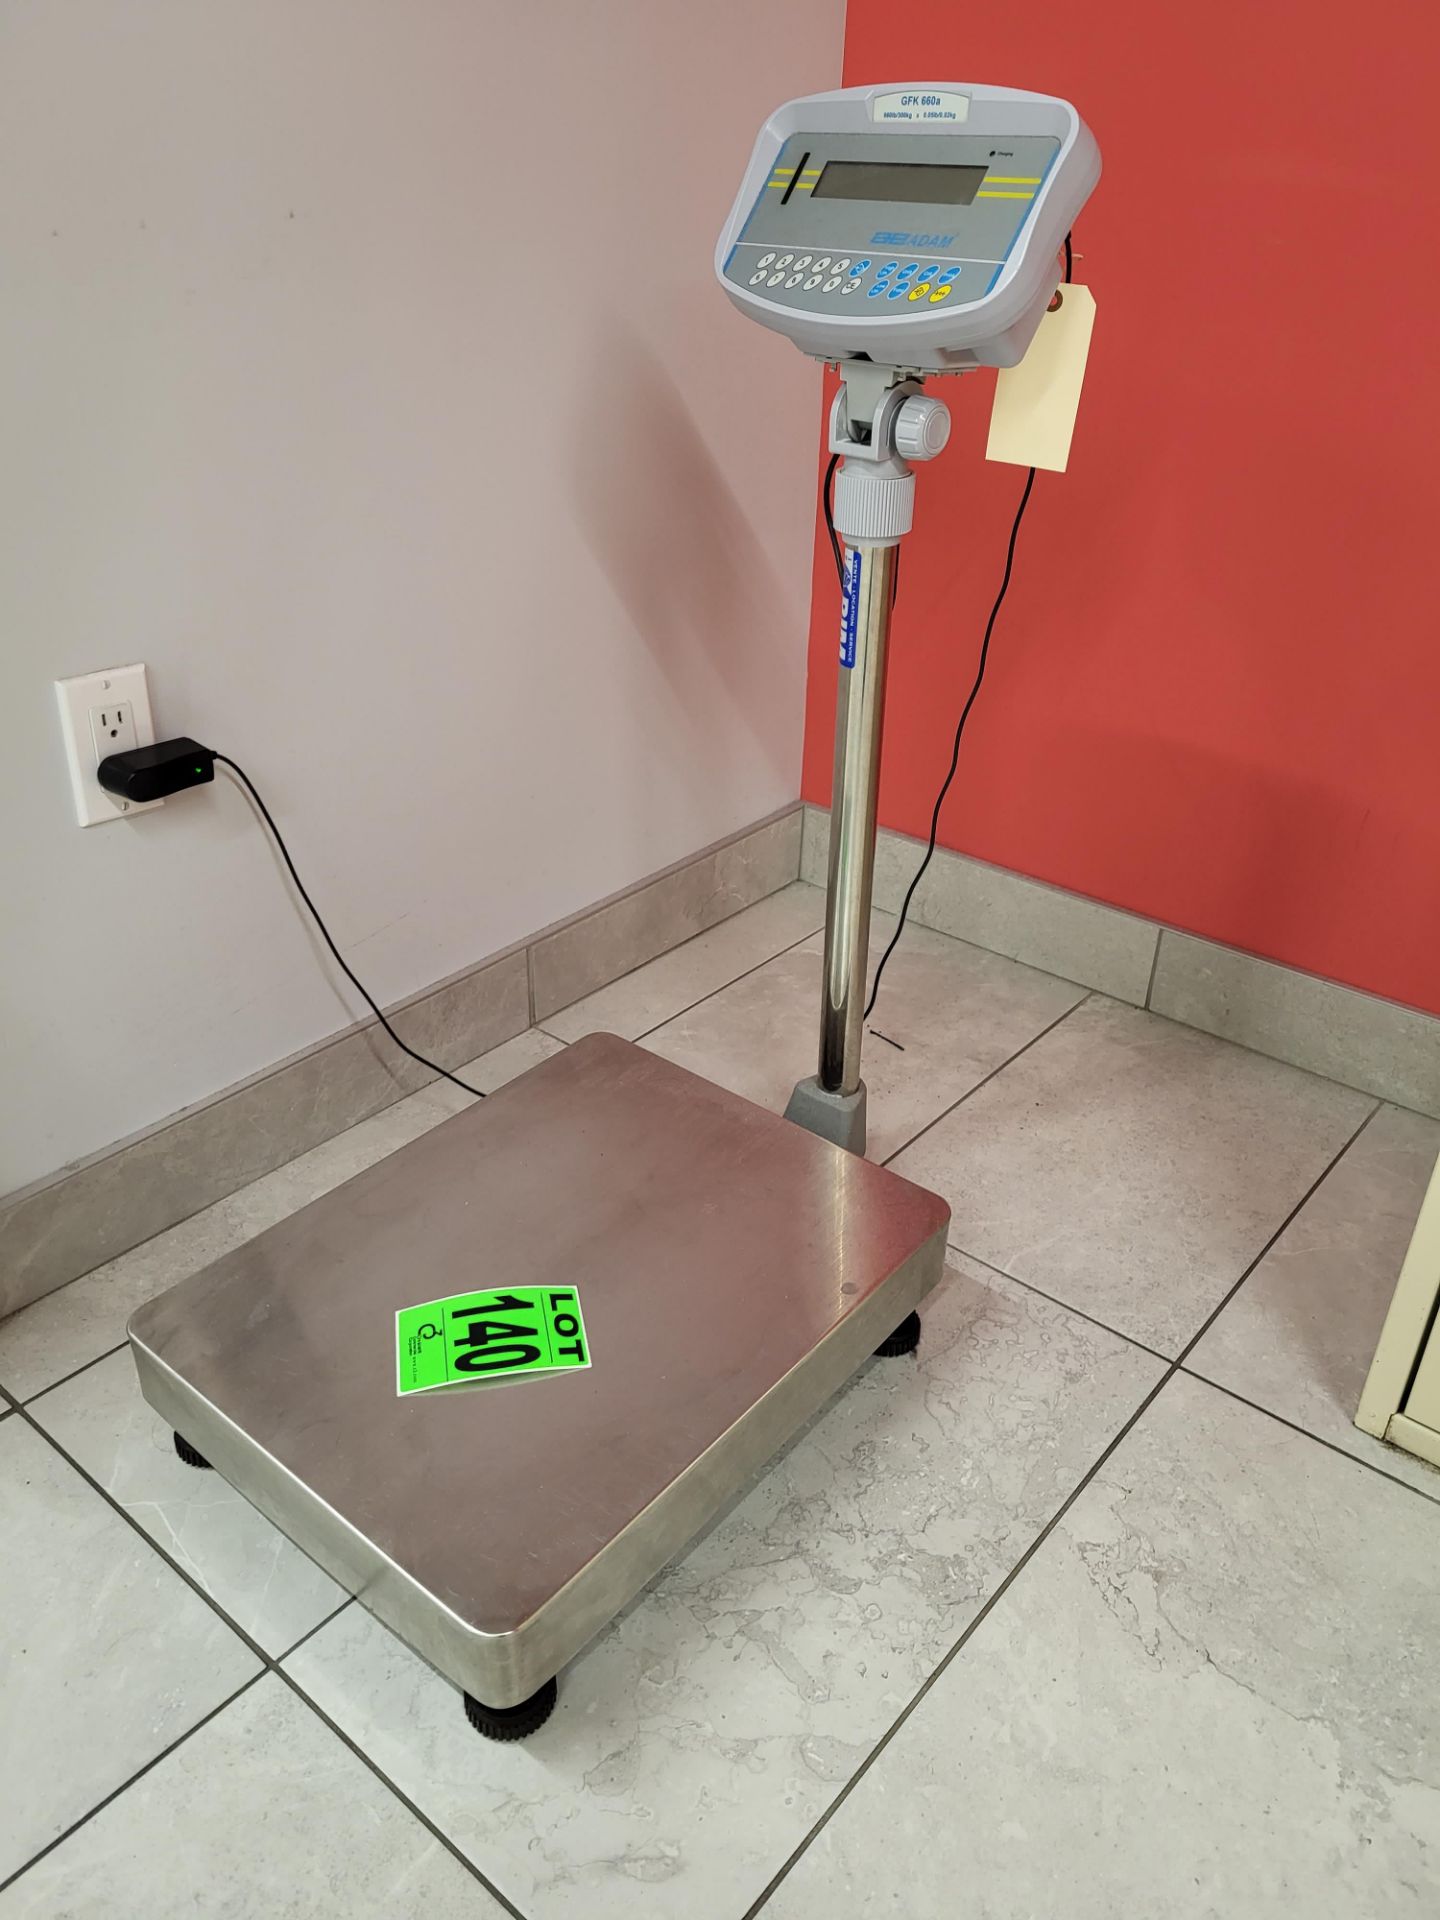 ADAM mod. GFK-660a Floor Checkweighing Scale, 660 lb / 300kg x 0.05lb/0.02kg - Image 2 of 6